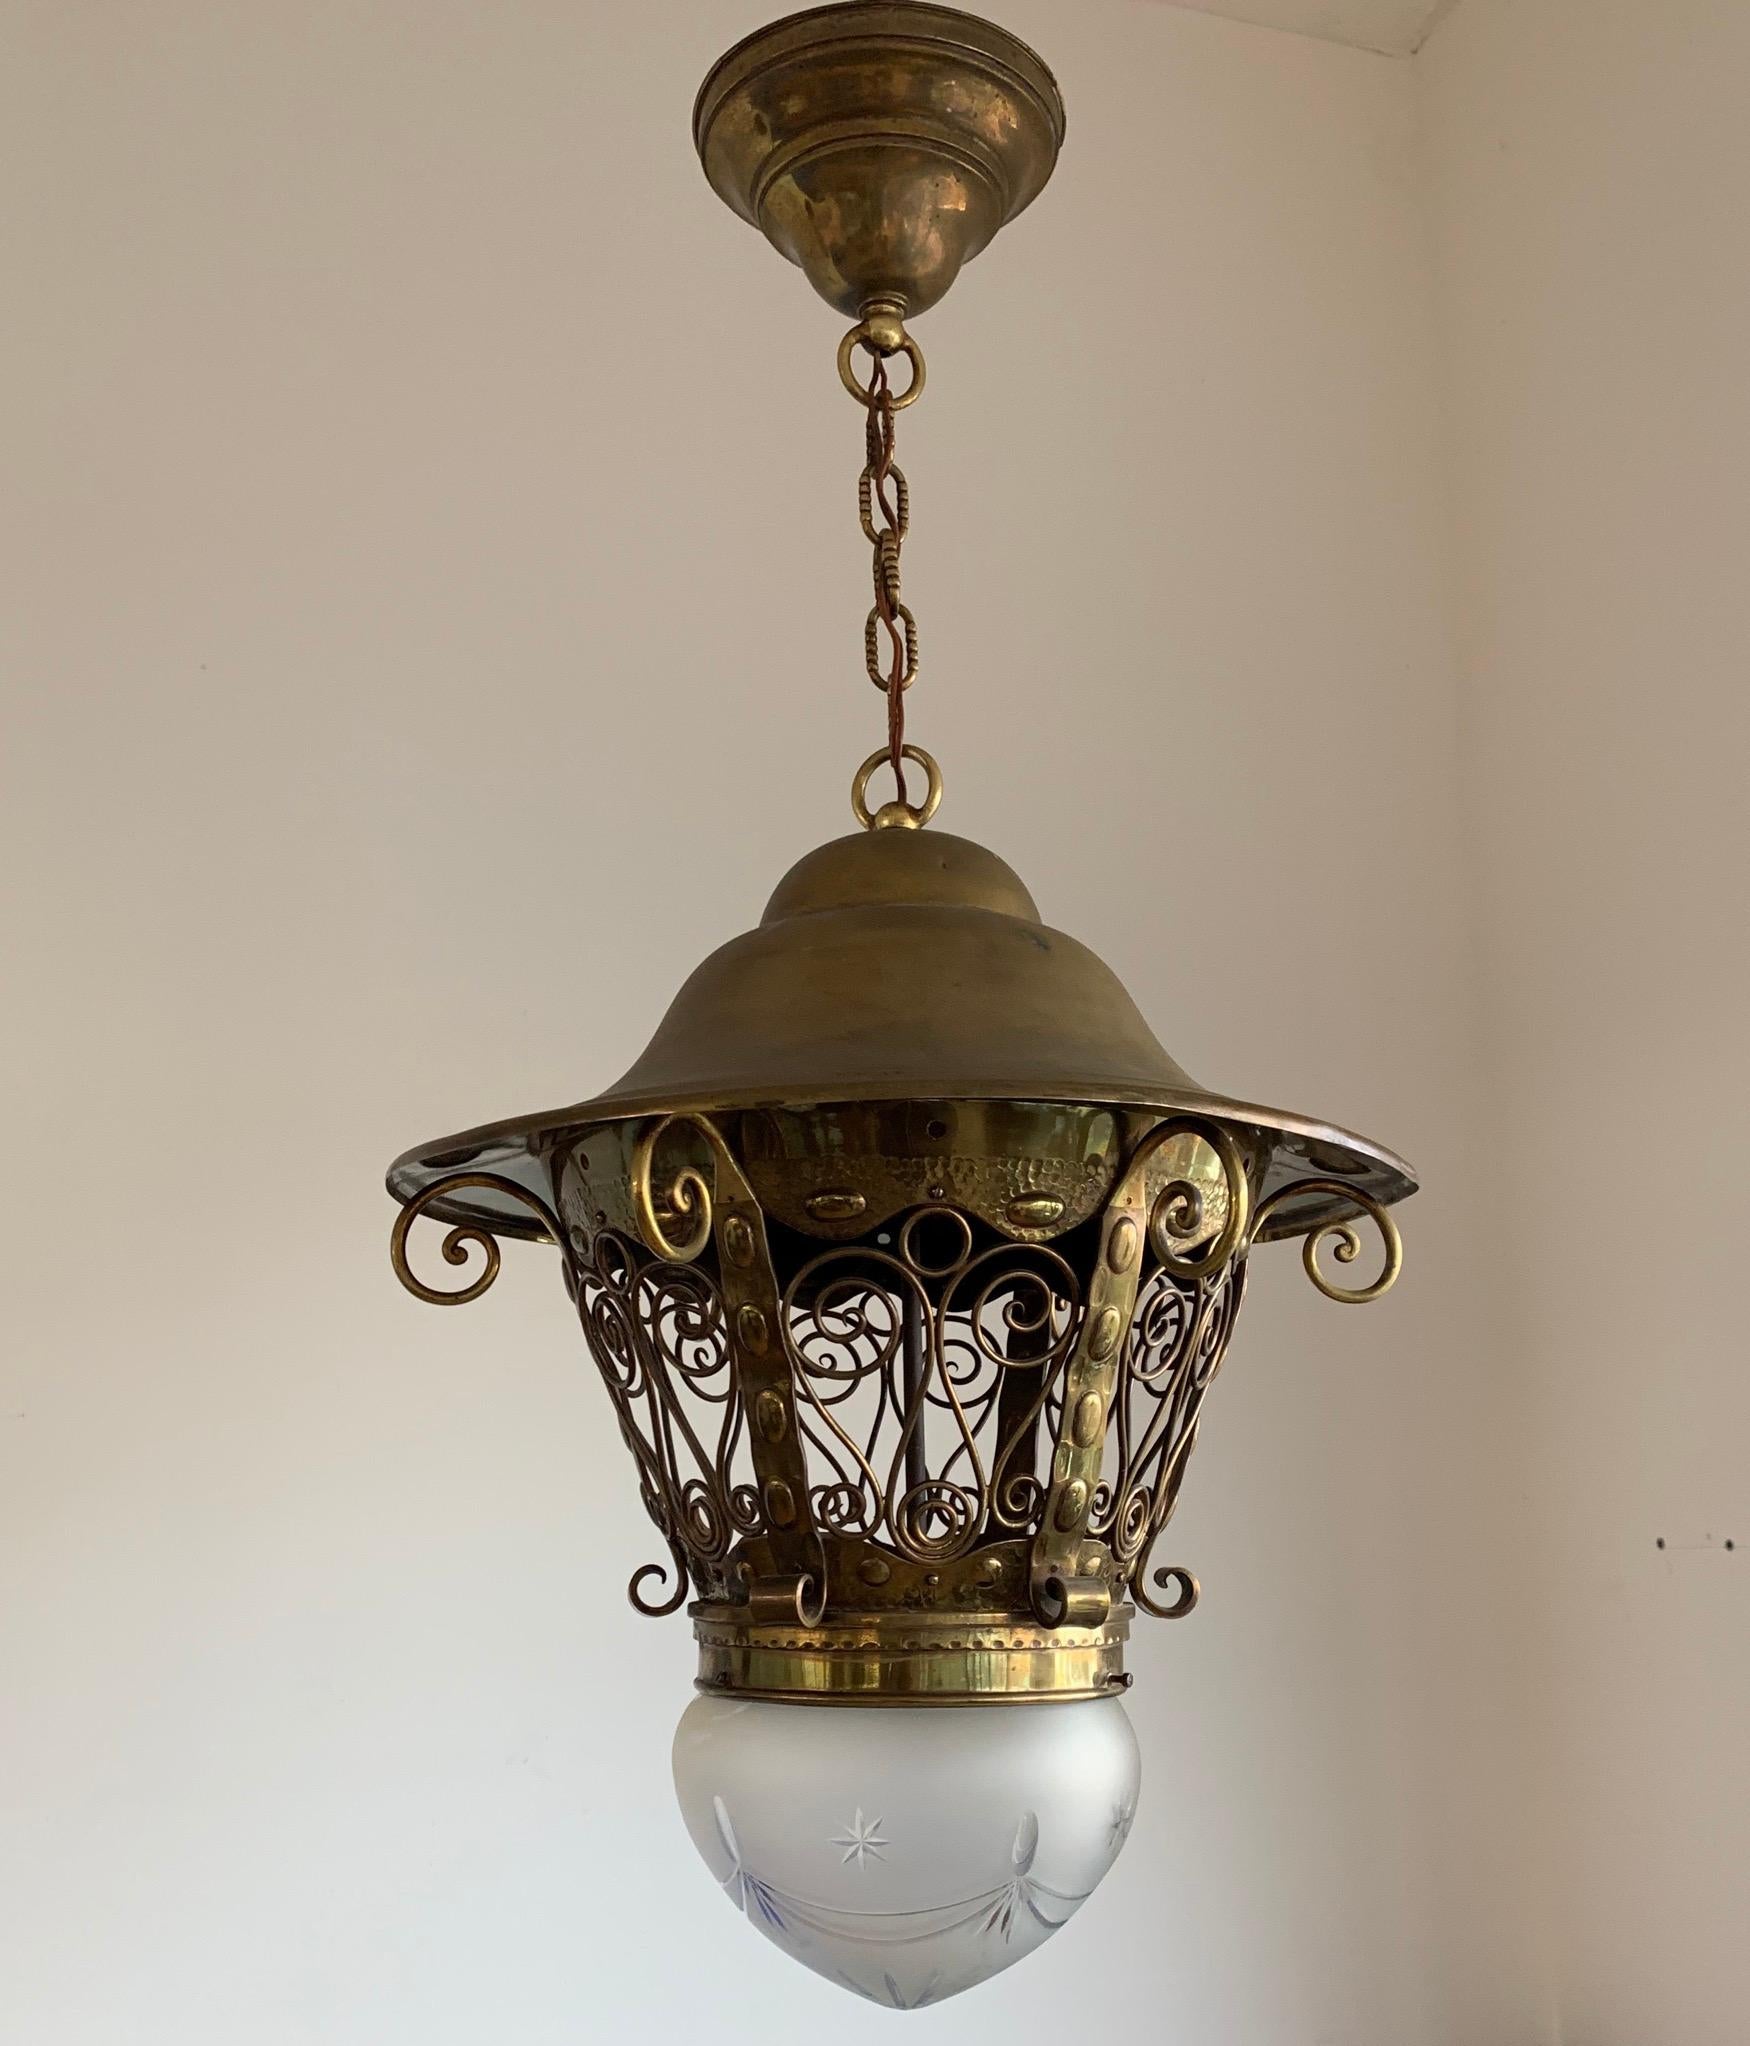 Hammered Large Late 19th Century Brass & Glass Arts and Crafts Pendant / Light Fixture For Sale